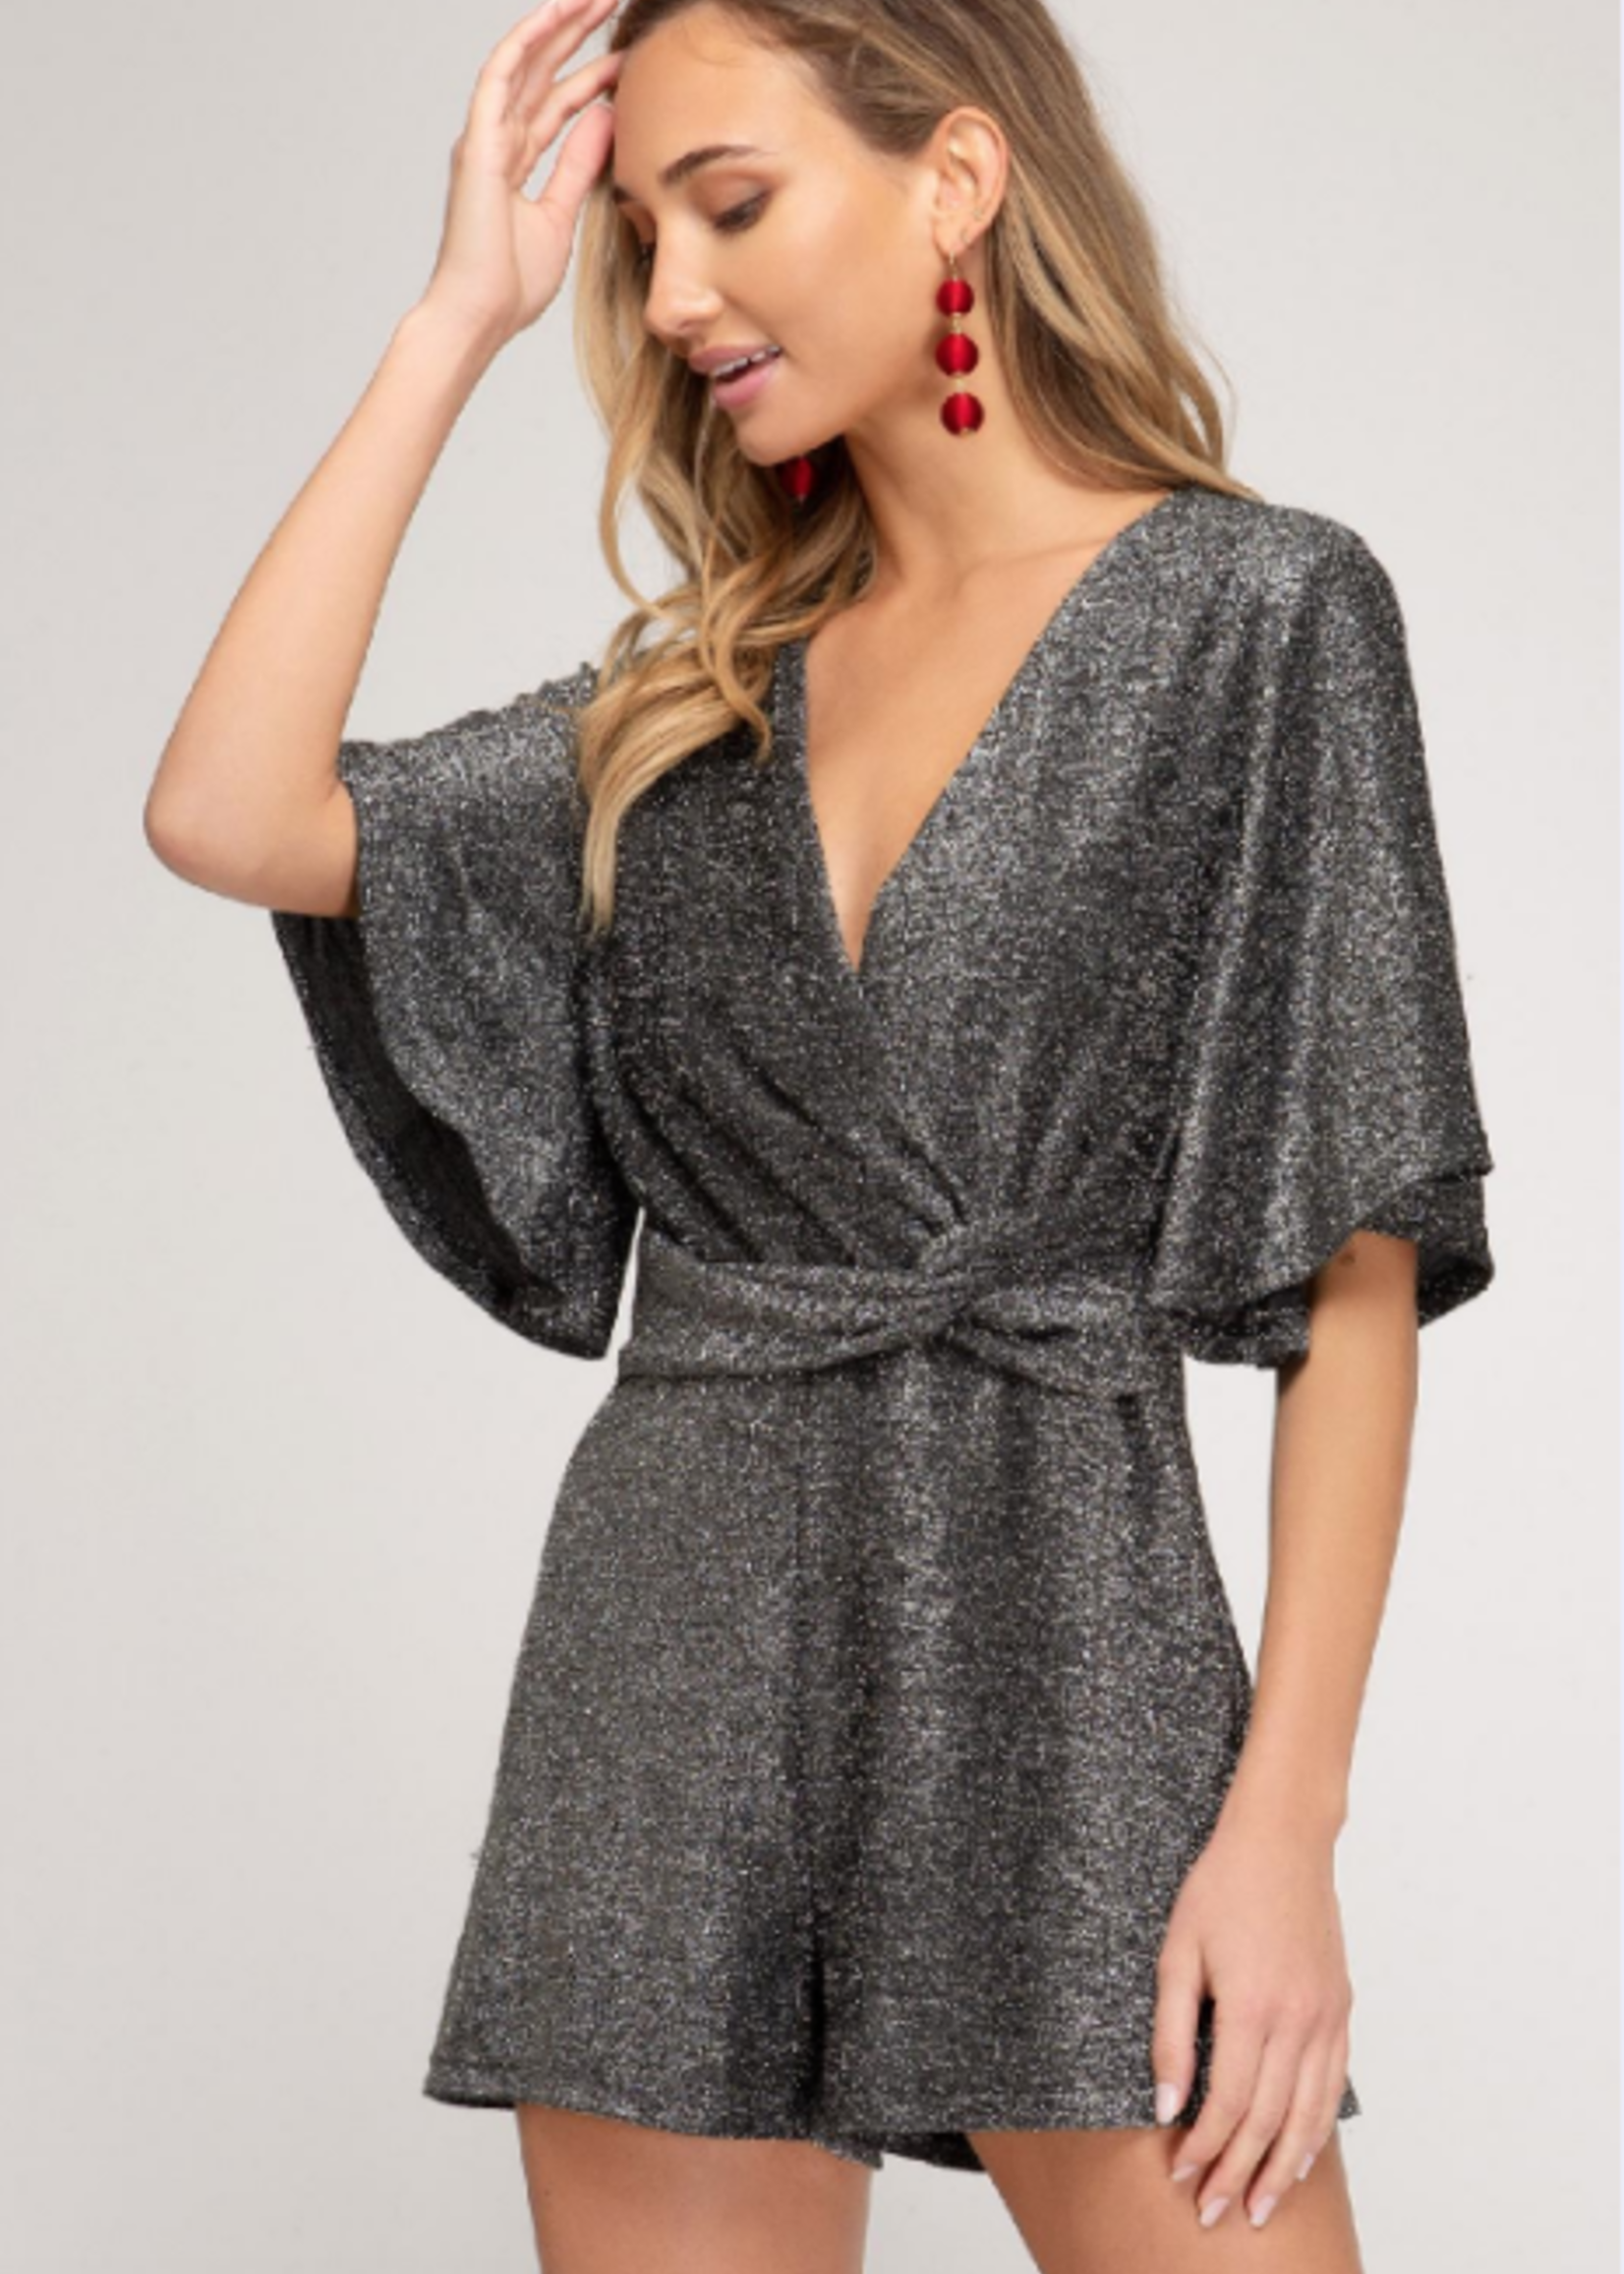 Silver Front Twist Party Romper